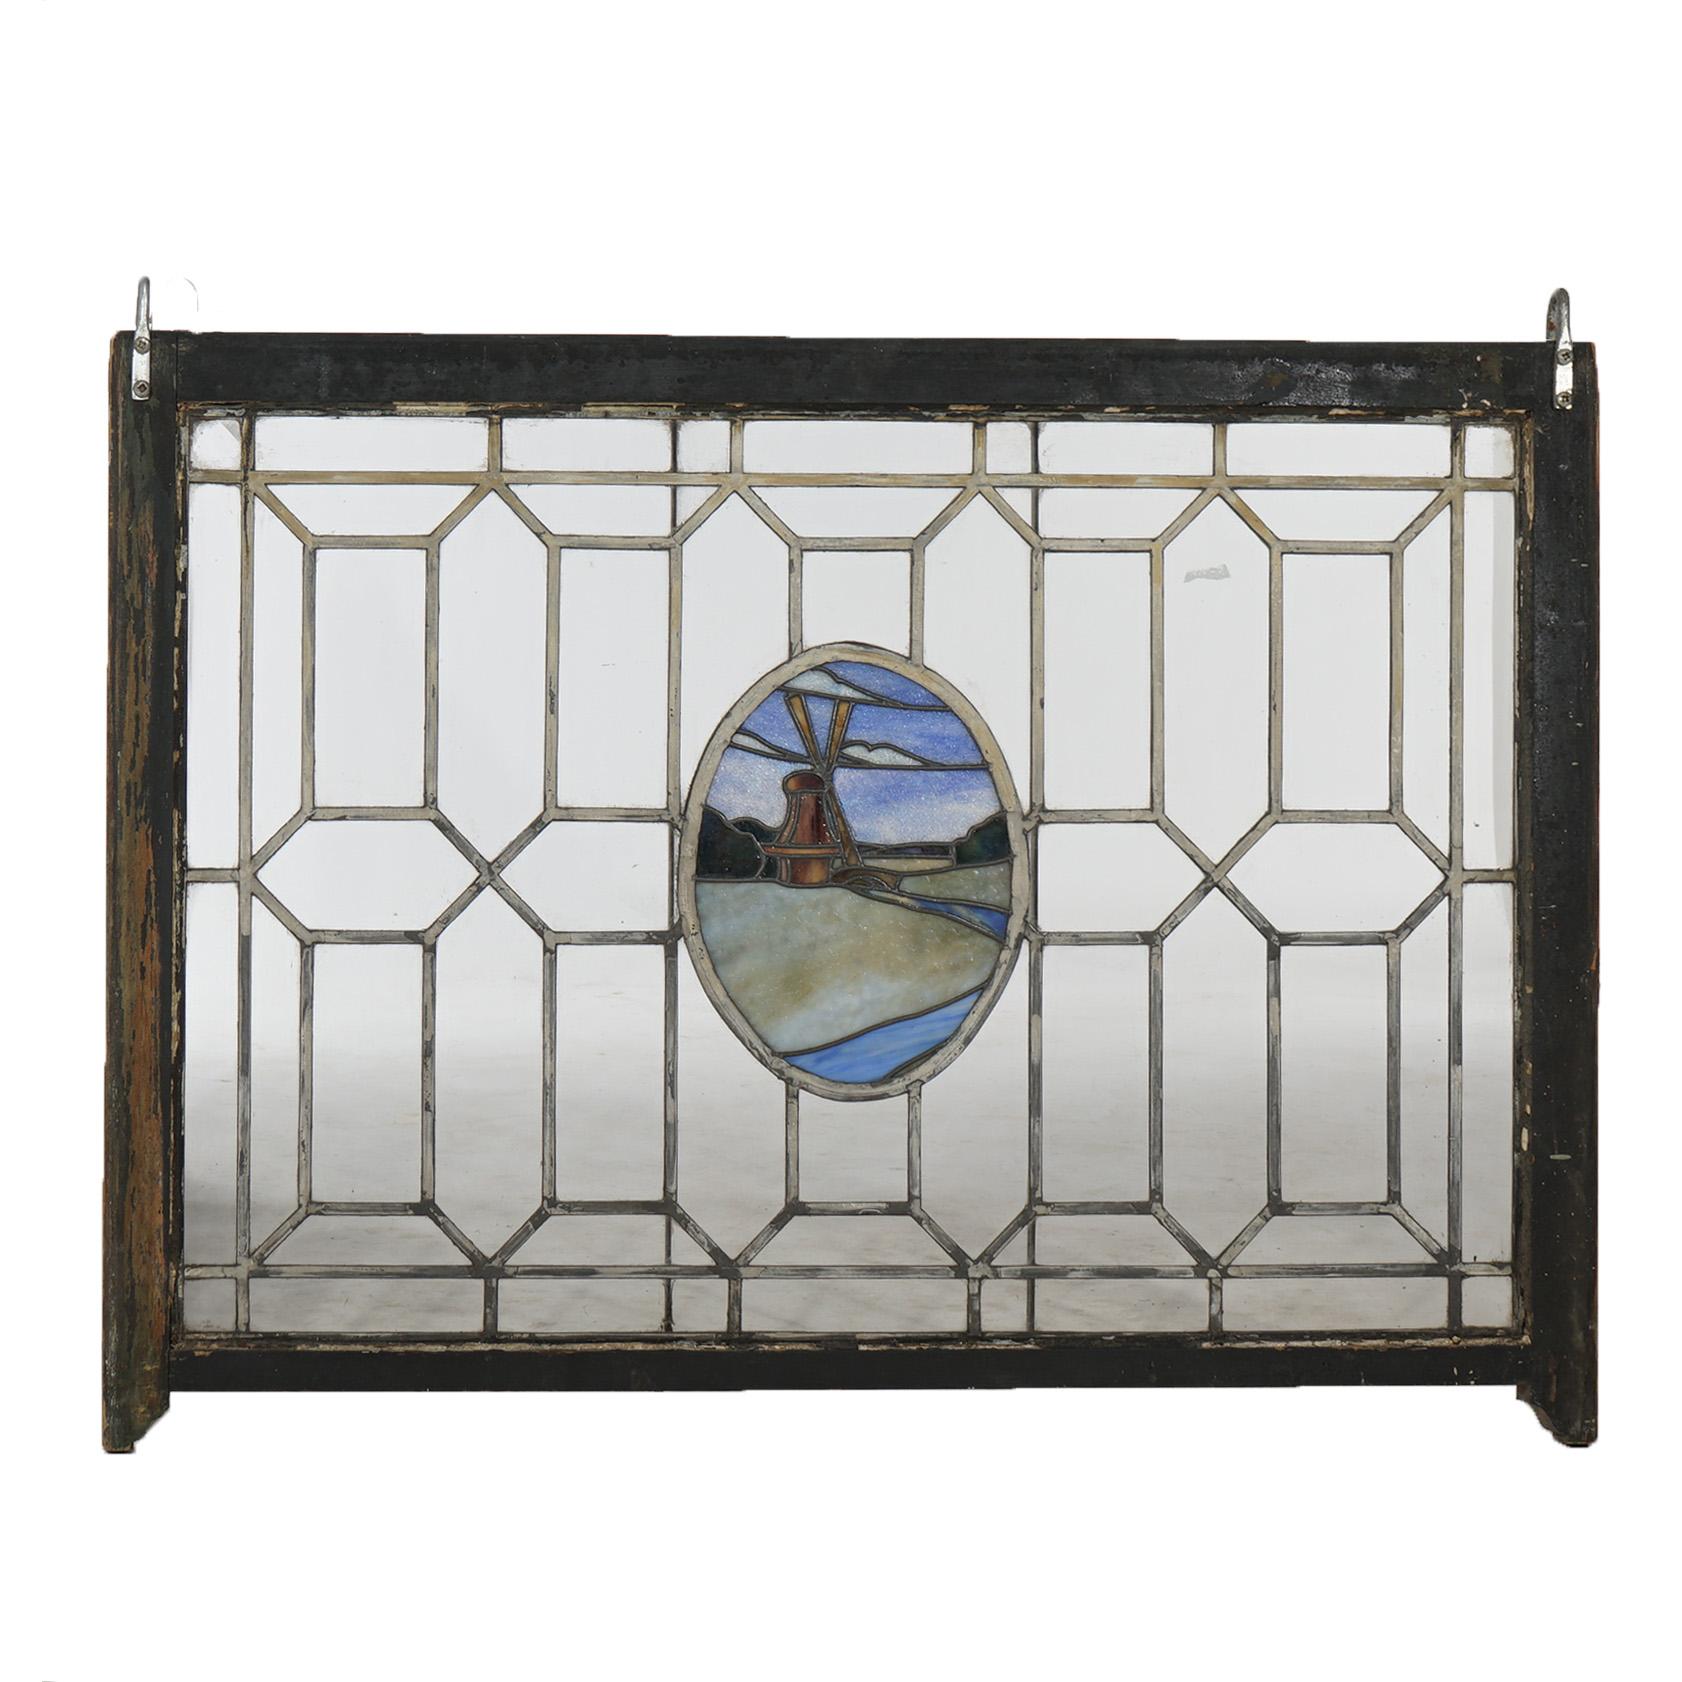 Antique Arts & Crafts Leaded & Stained Glass Window with Windmill, c1910 For Sale 2